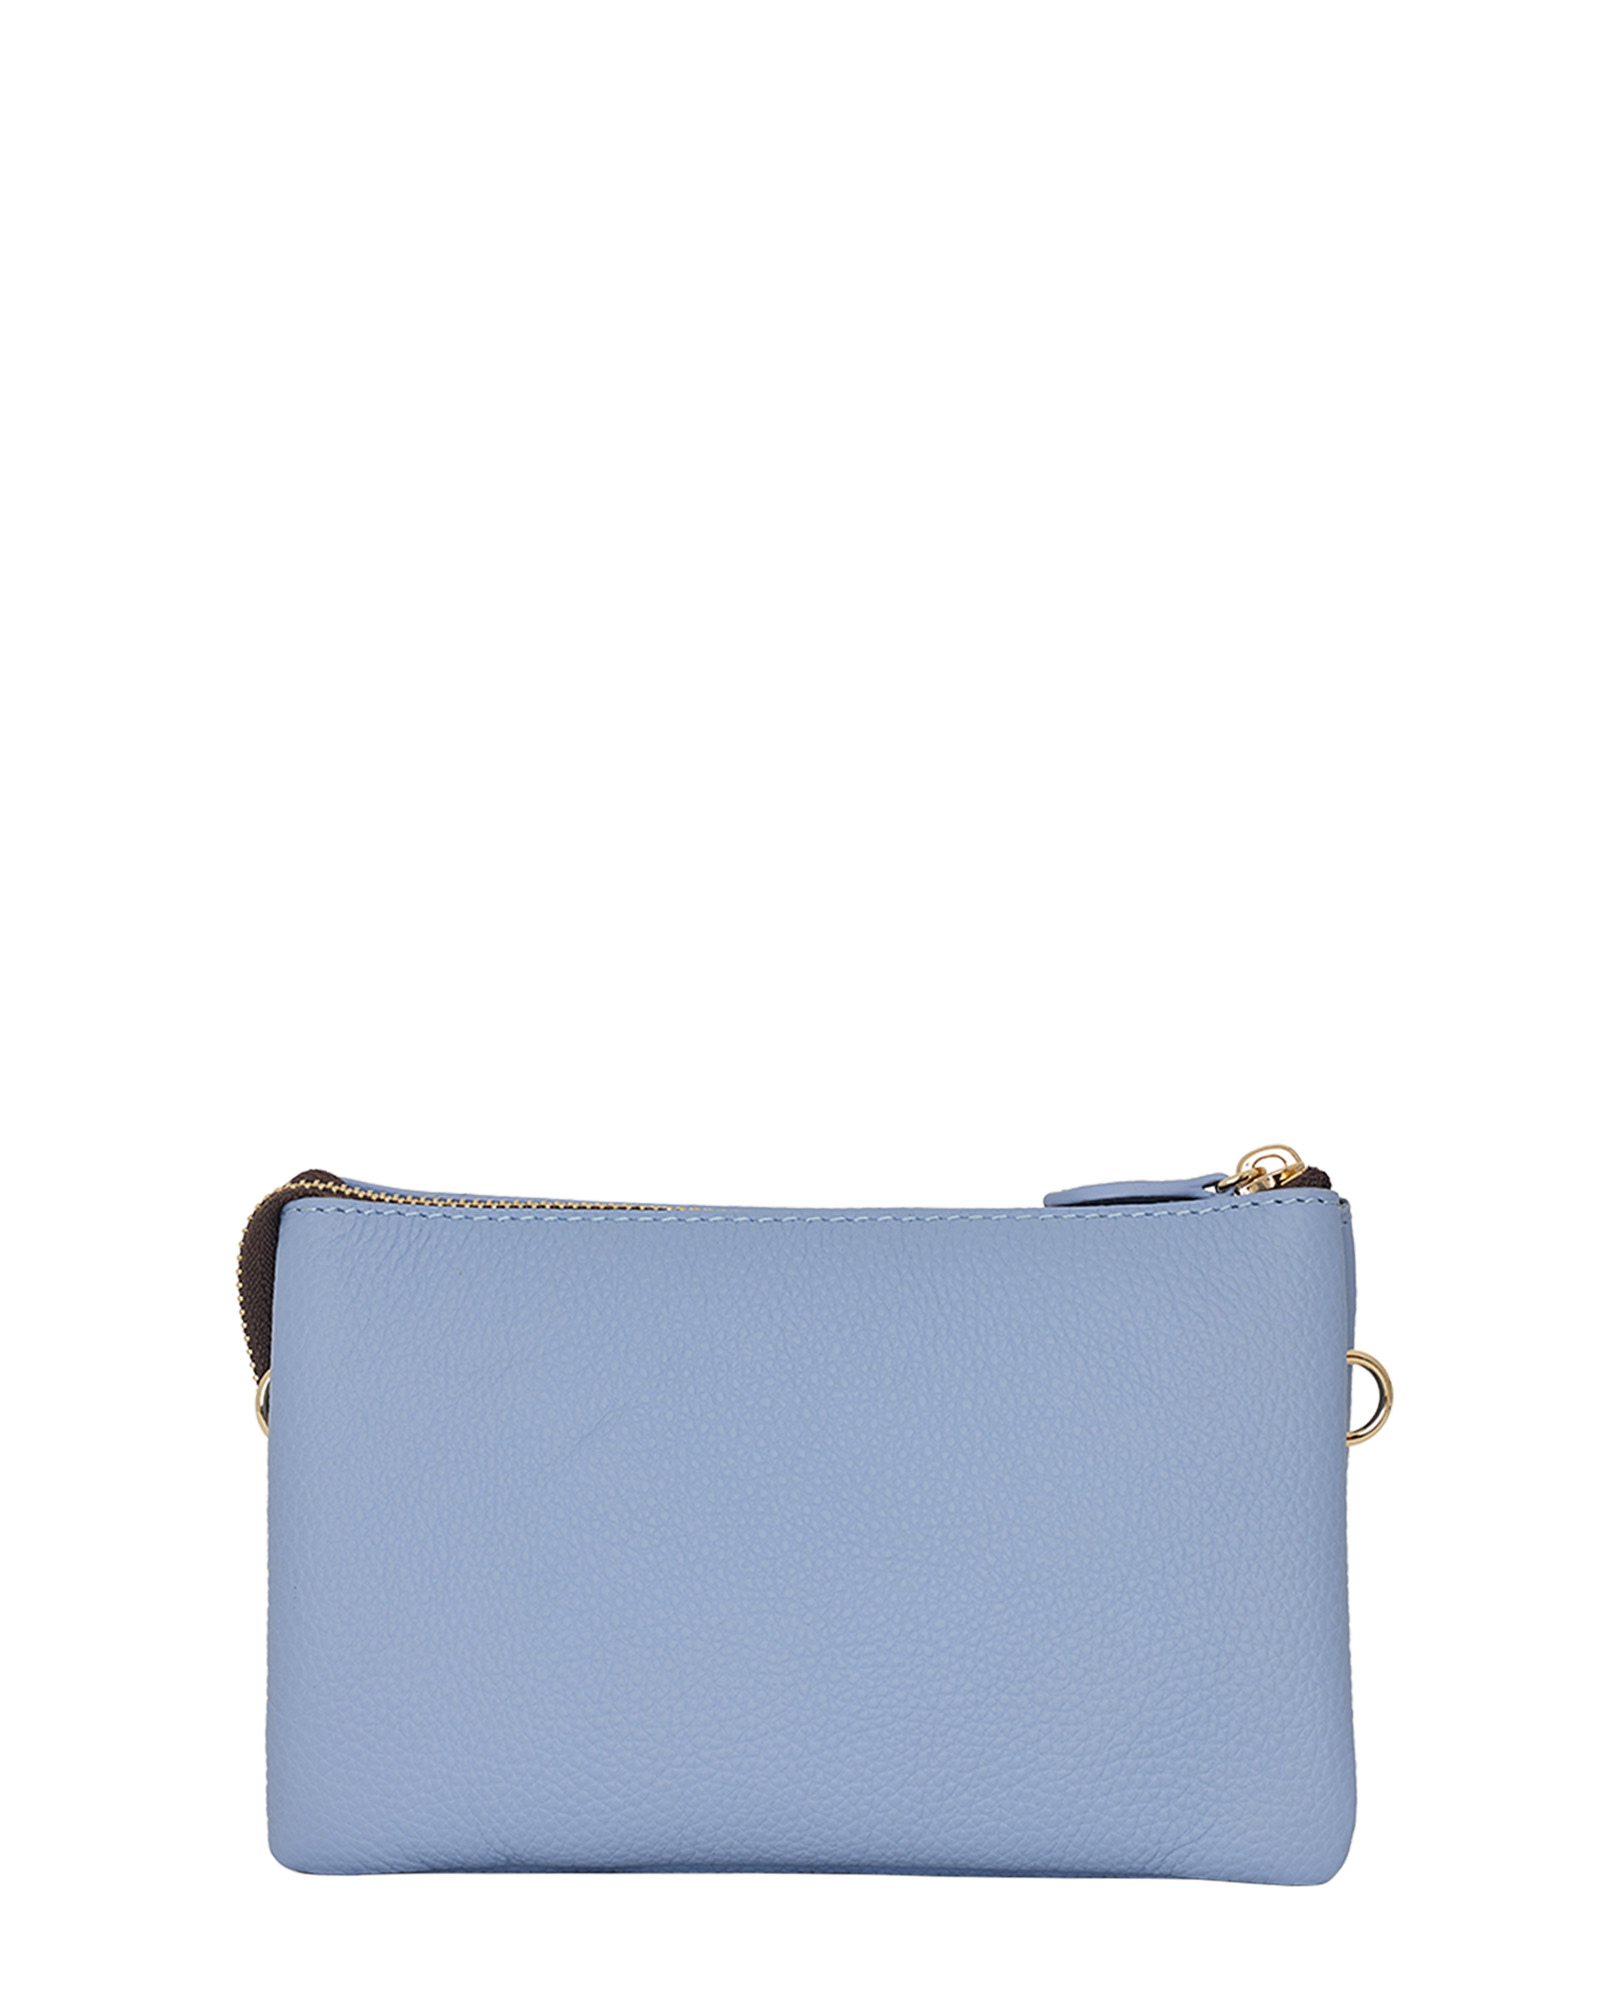 Saben Tilly Crossbody Hydrangea - Issimo Shoes